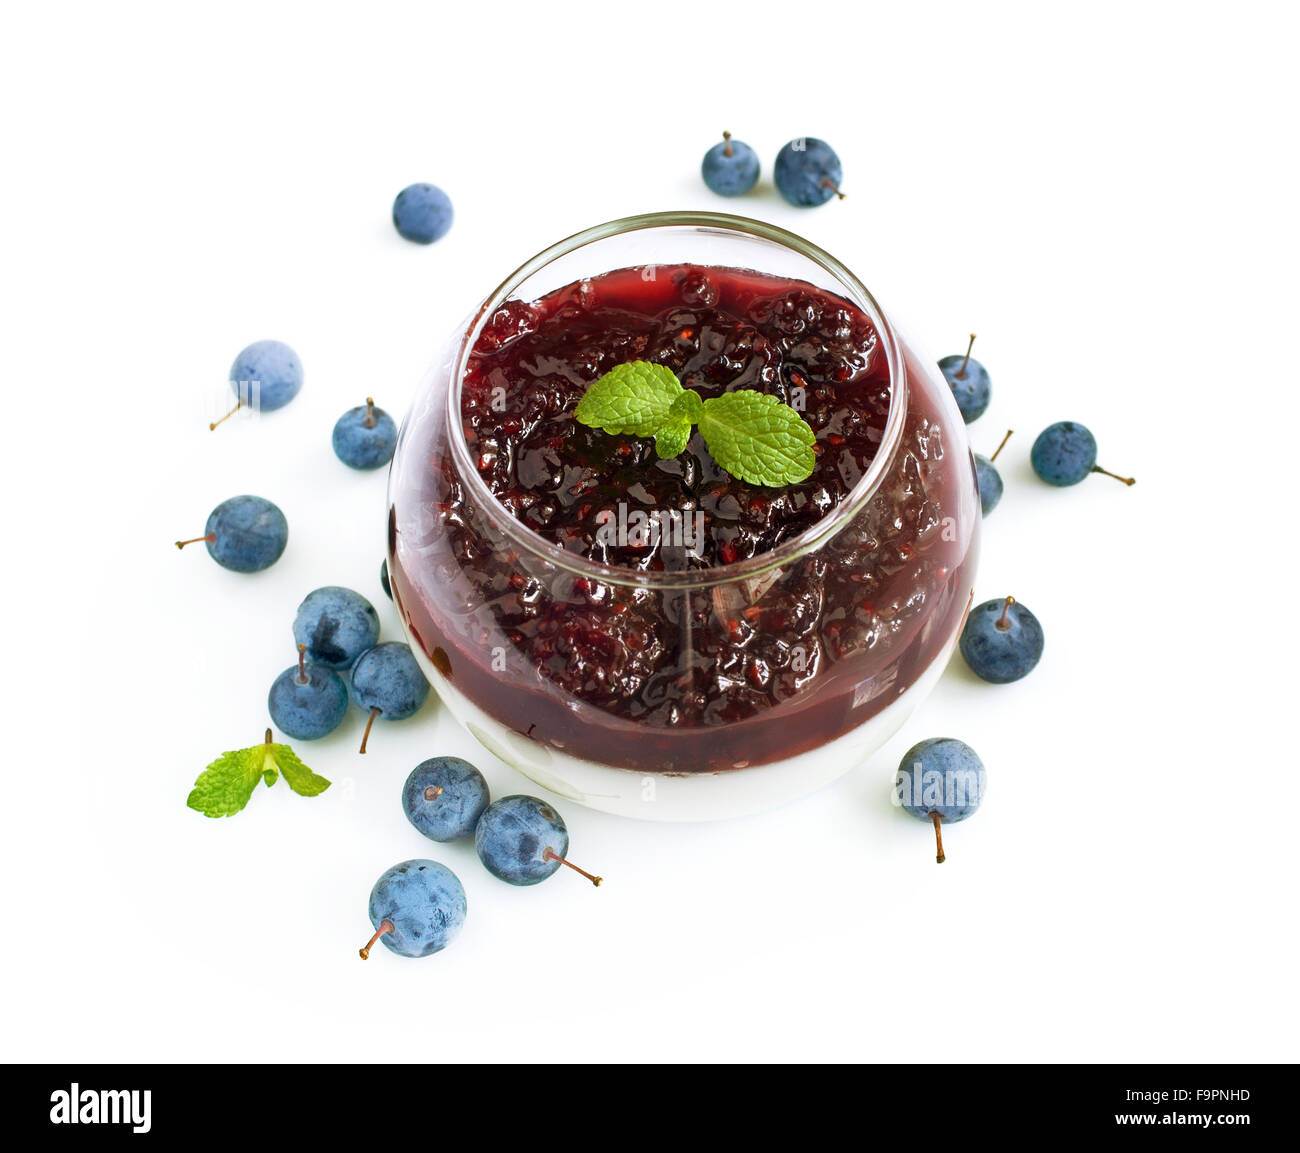 Panna cotta with blackthorn isolated on white background Stock Photo